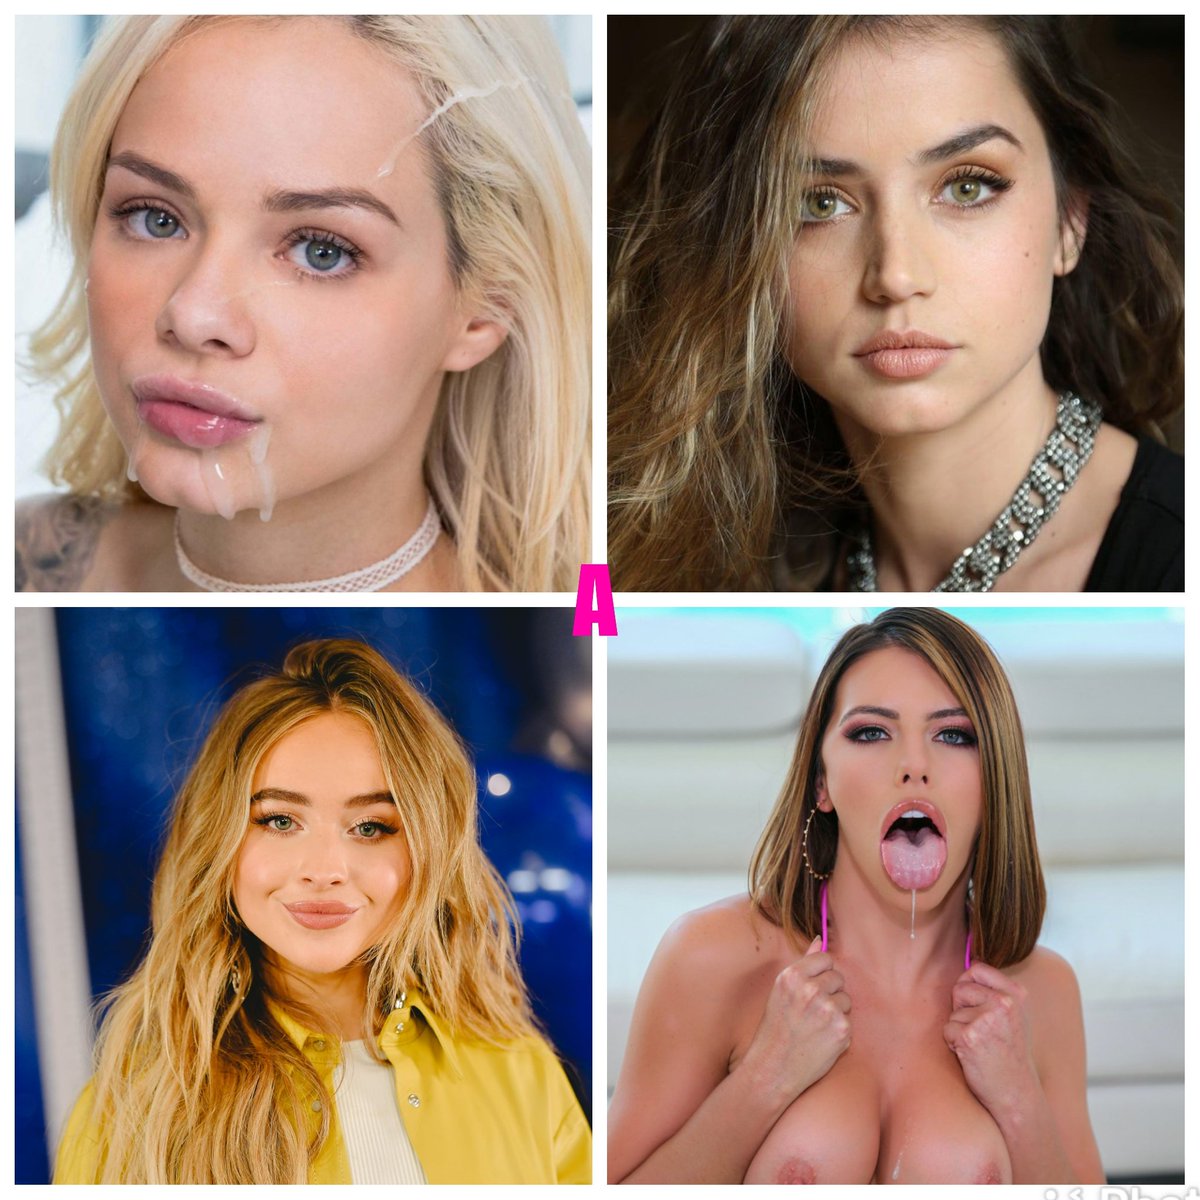 Xsexycelebs  Hot Choices Which pornstar x Celeb group are you choosing for an oral only group night.